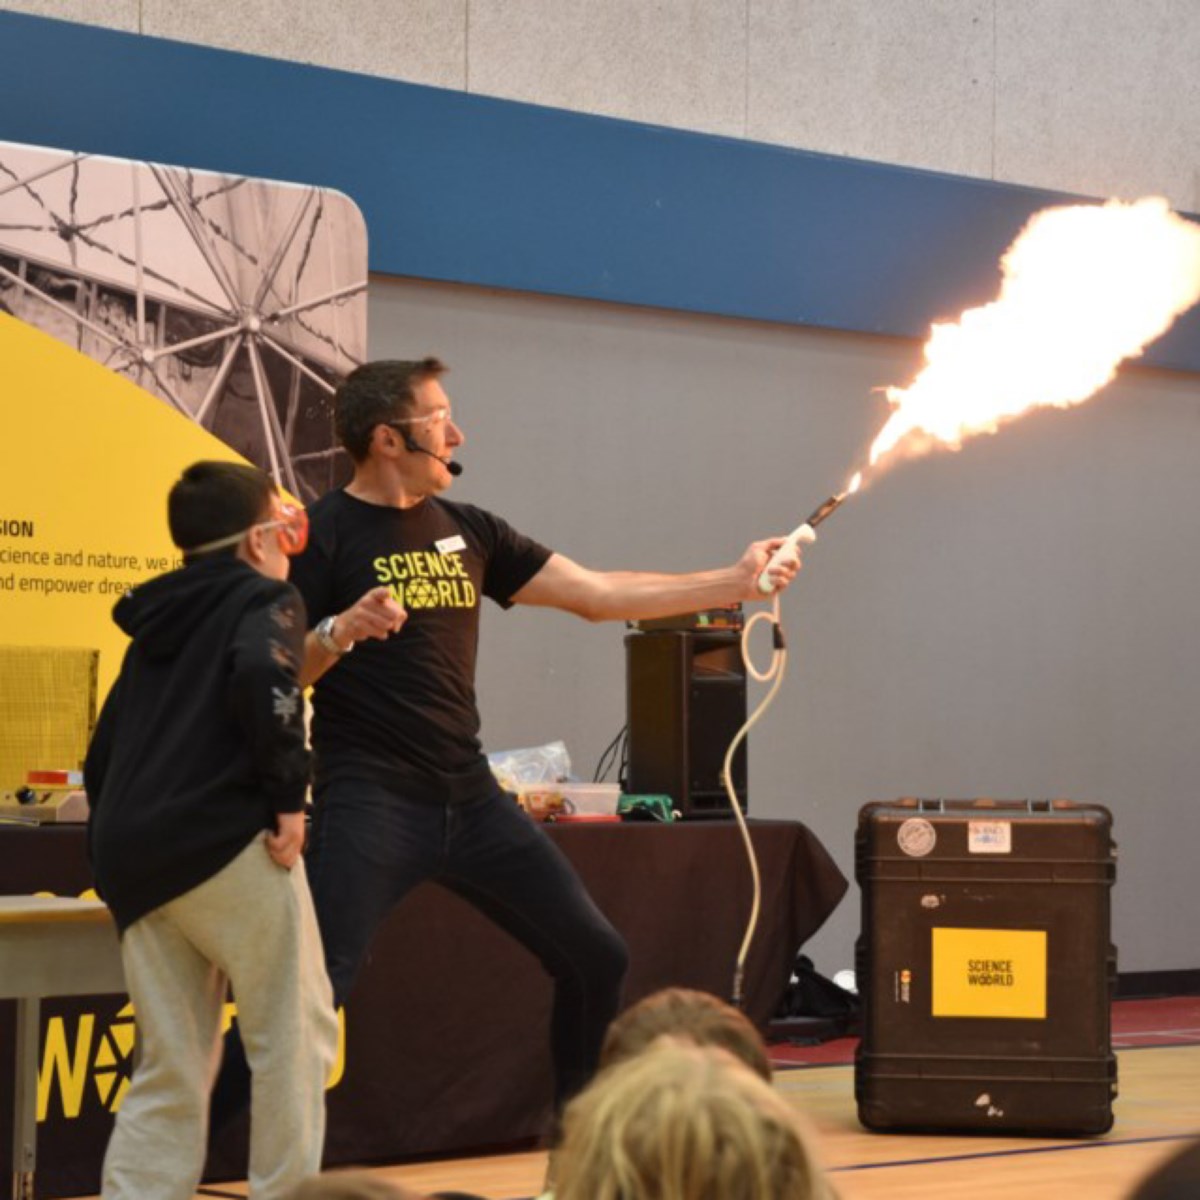 World of Science demonstrations are coming to the Qathiet School District